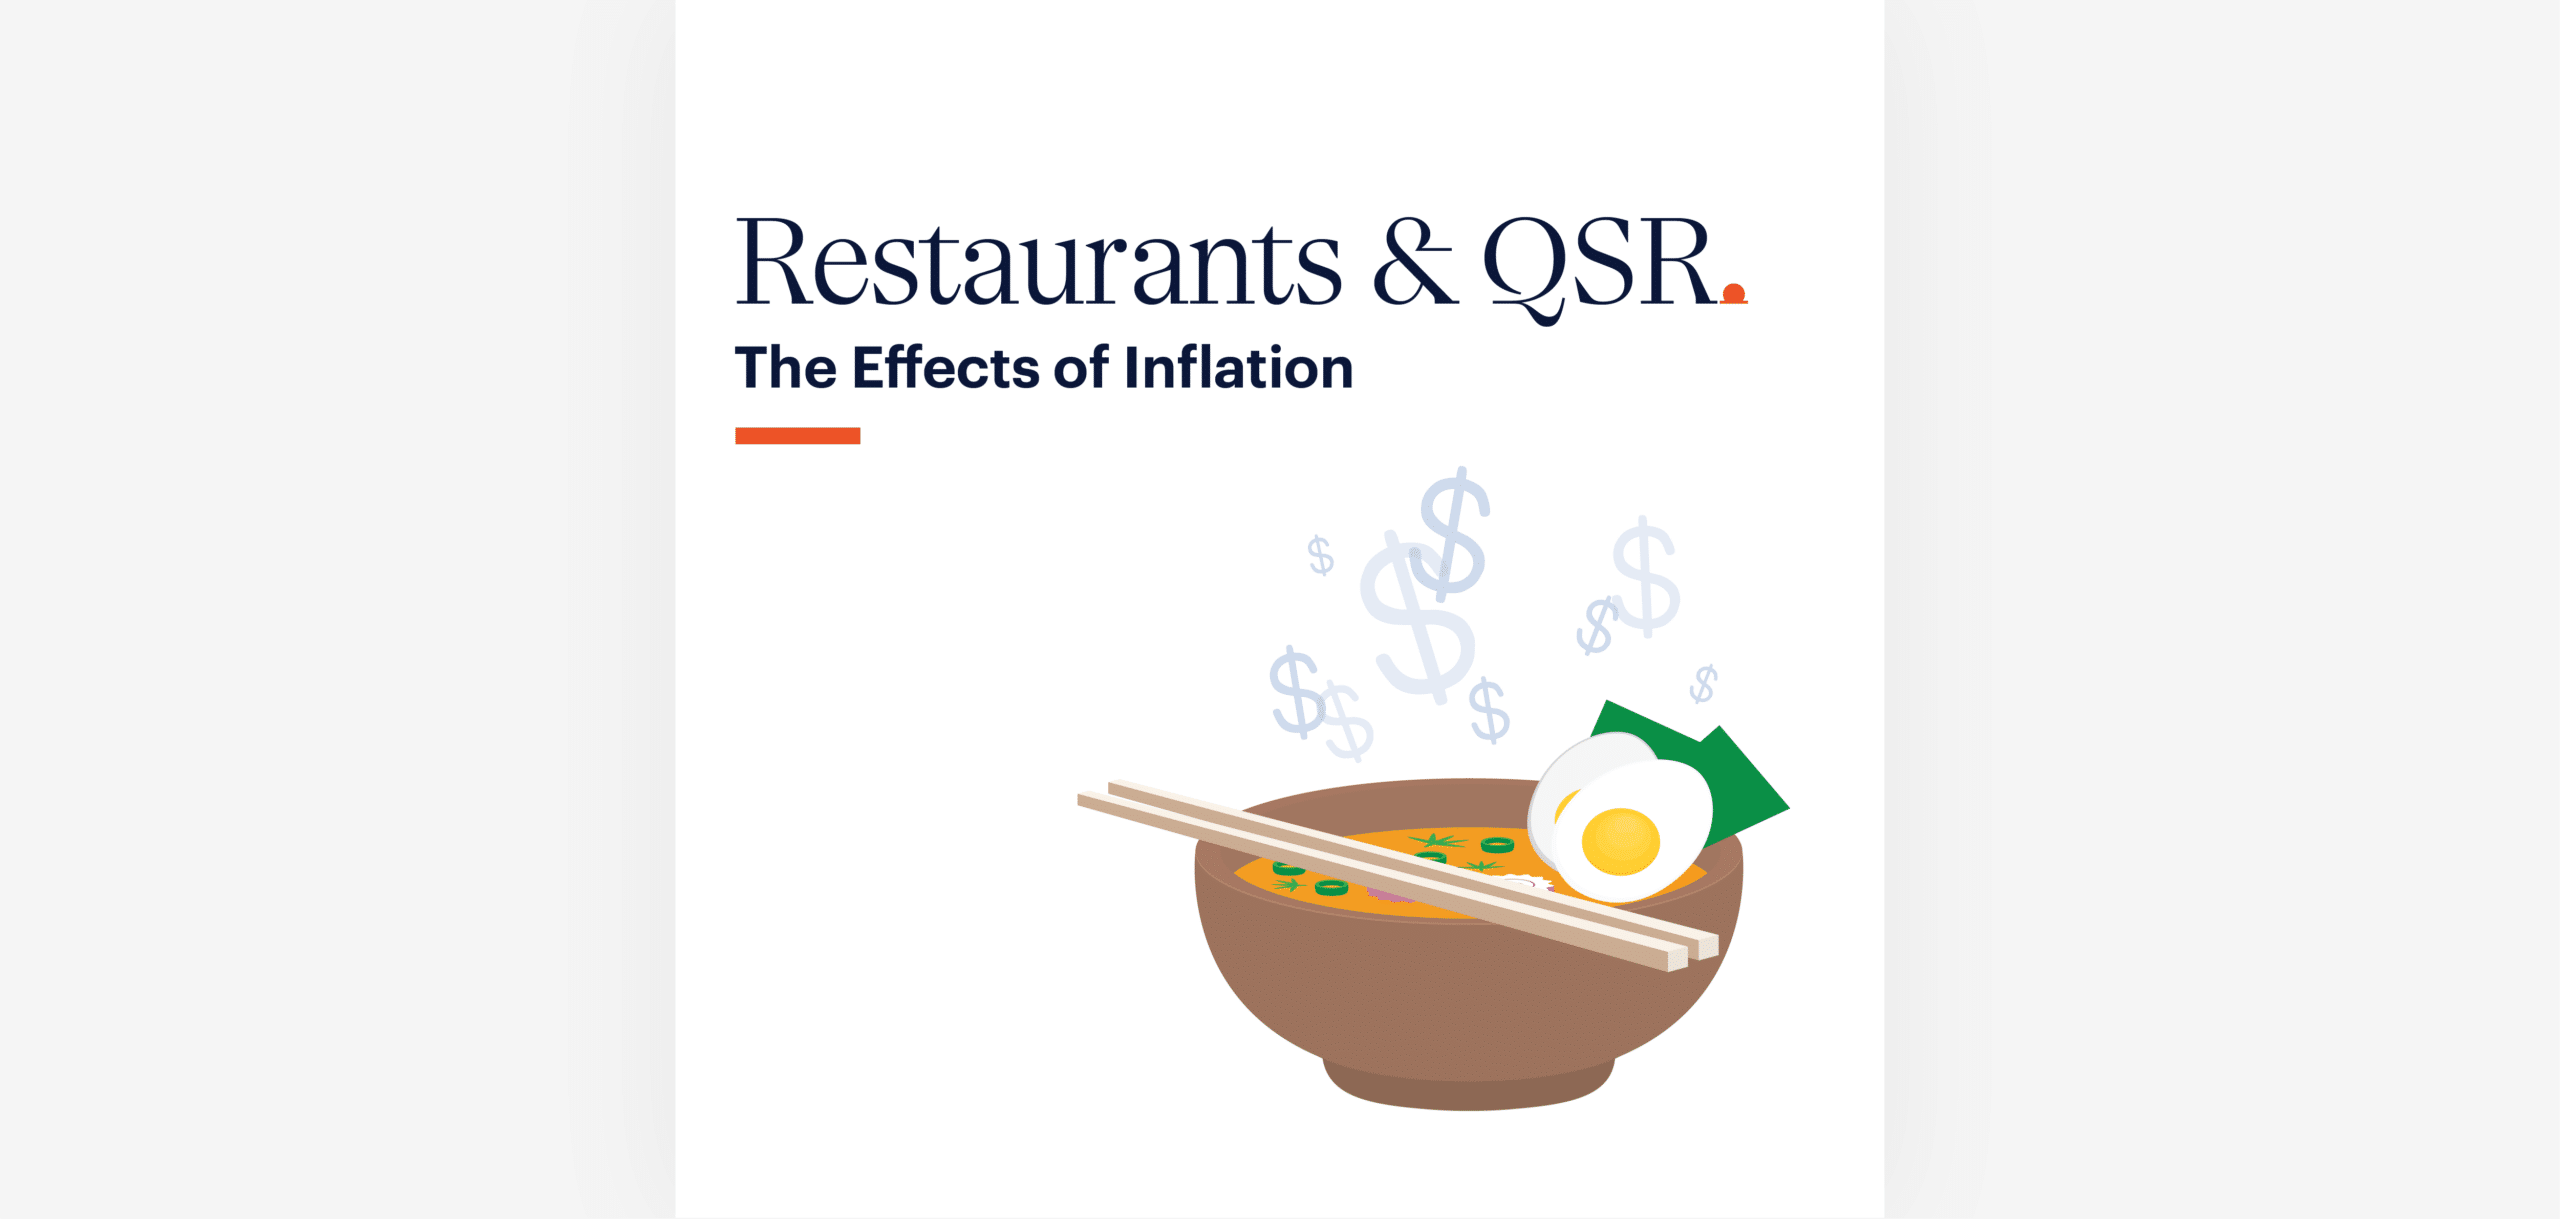 A graphic titled "Restaurants & QSR: The Effects of Inflation." It features a bowl of noodles with chopsticks, a boiled egg, green veggies, and steam rising in the shape of dollar signs, symbolizing the rising costs in the restaurant industry due to inflation.